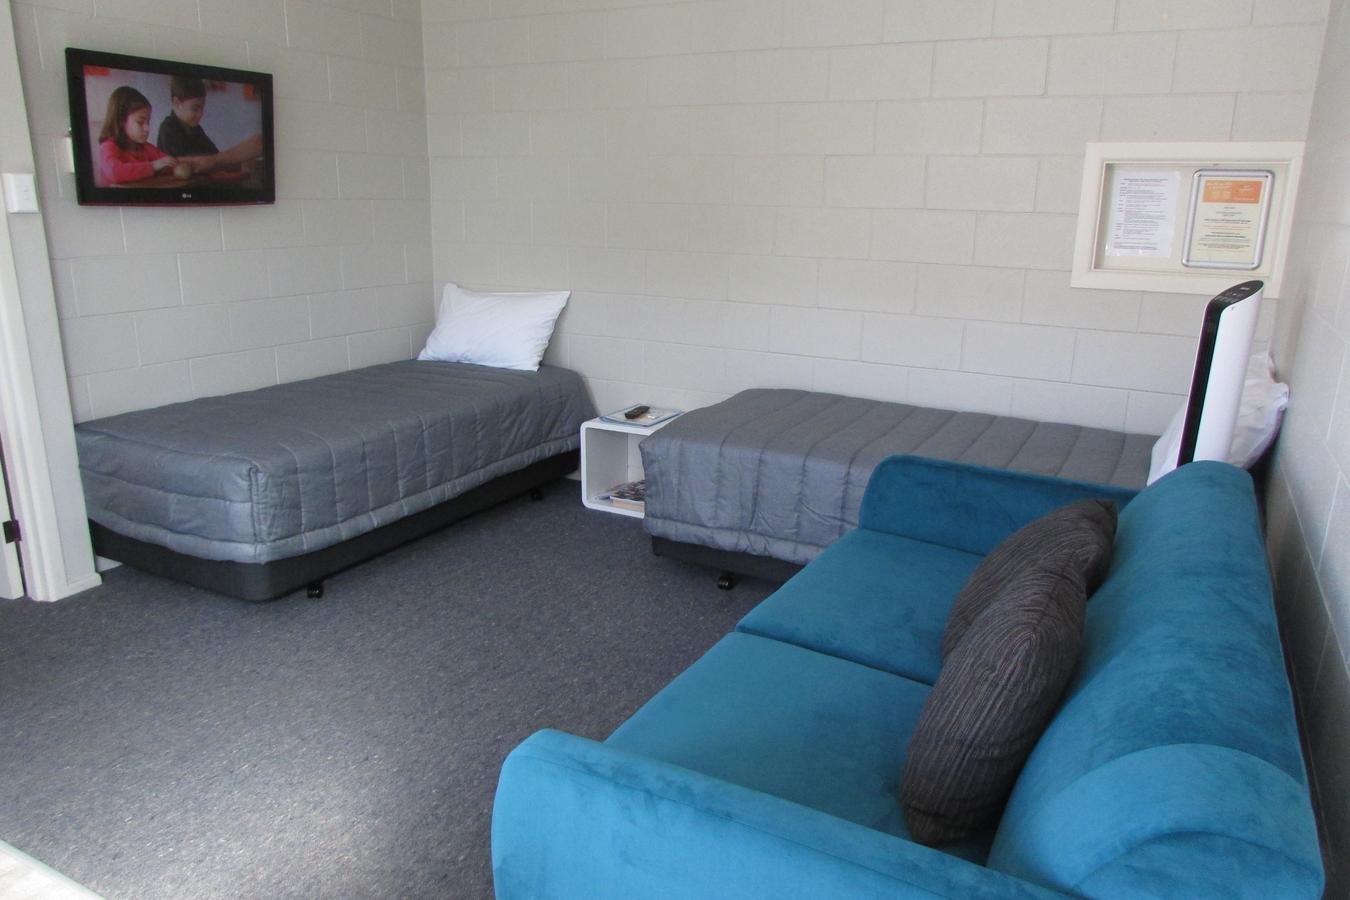 Enjoy a comfortable stay in Self Contained Family Unit 1 at Cosy Corner Holiday Park. This unit features a spacious living area, a fully-equipped kitchen, LCD TV, and more. Located near the road, please note some daytime traffic noise.